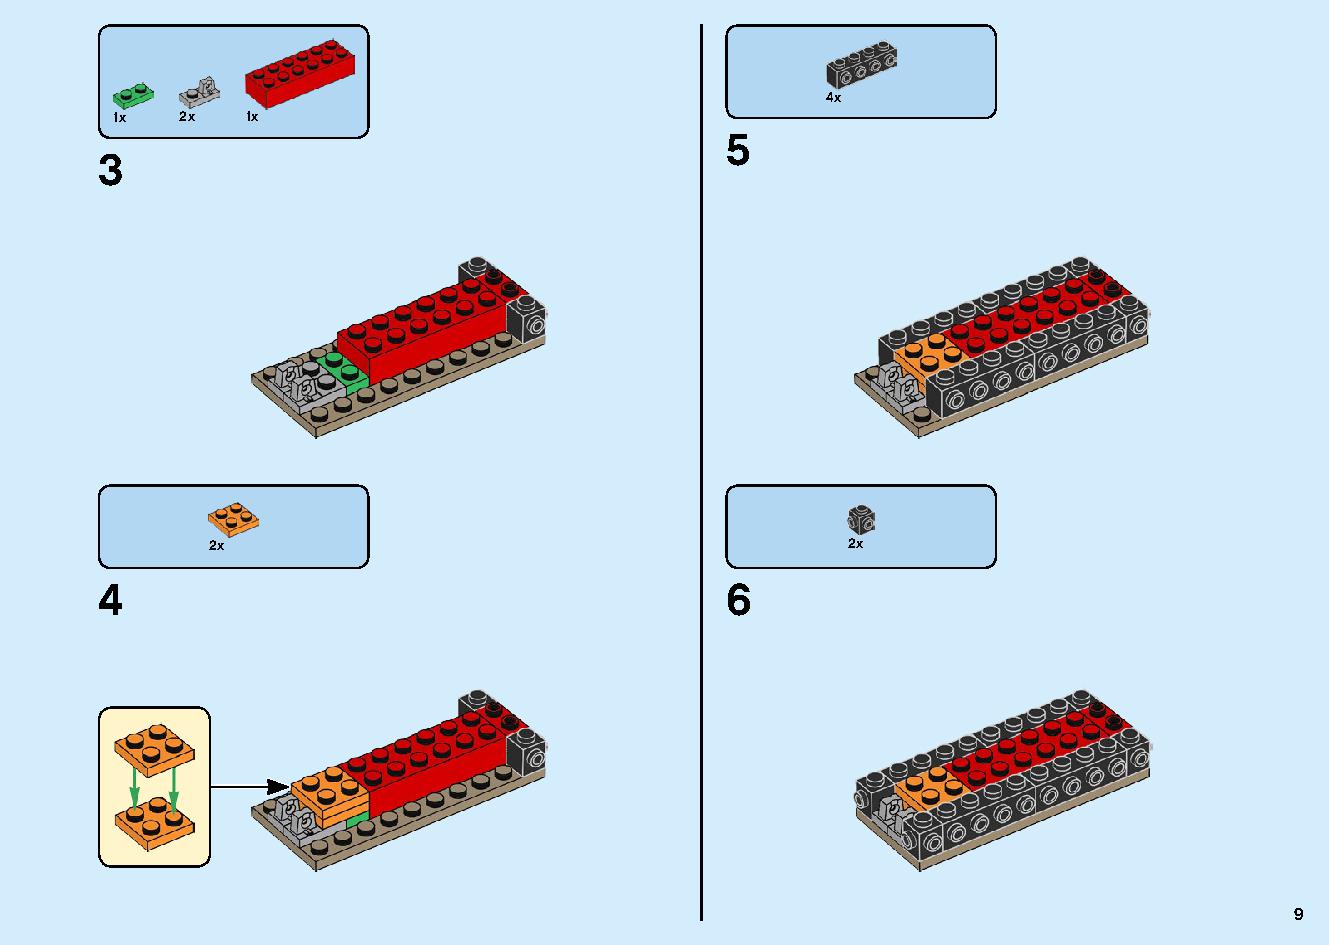 Fire Fang 70674 LEGO information LEGO instructions 9 page